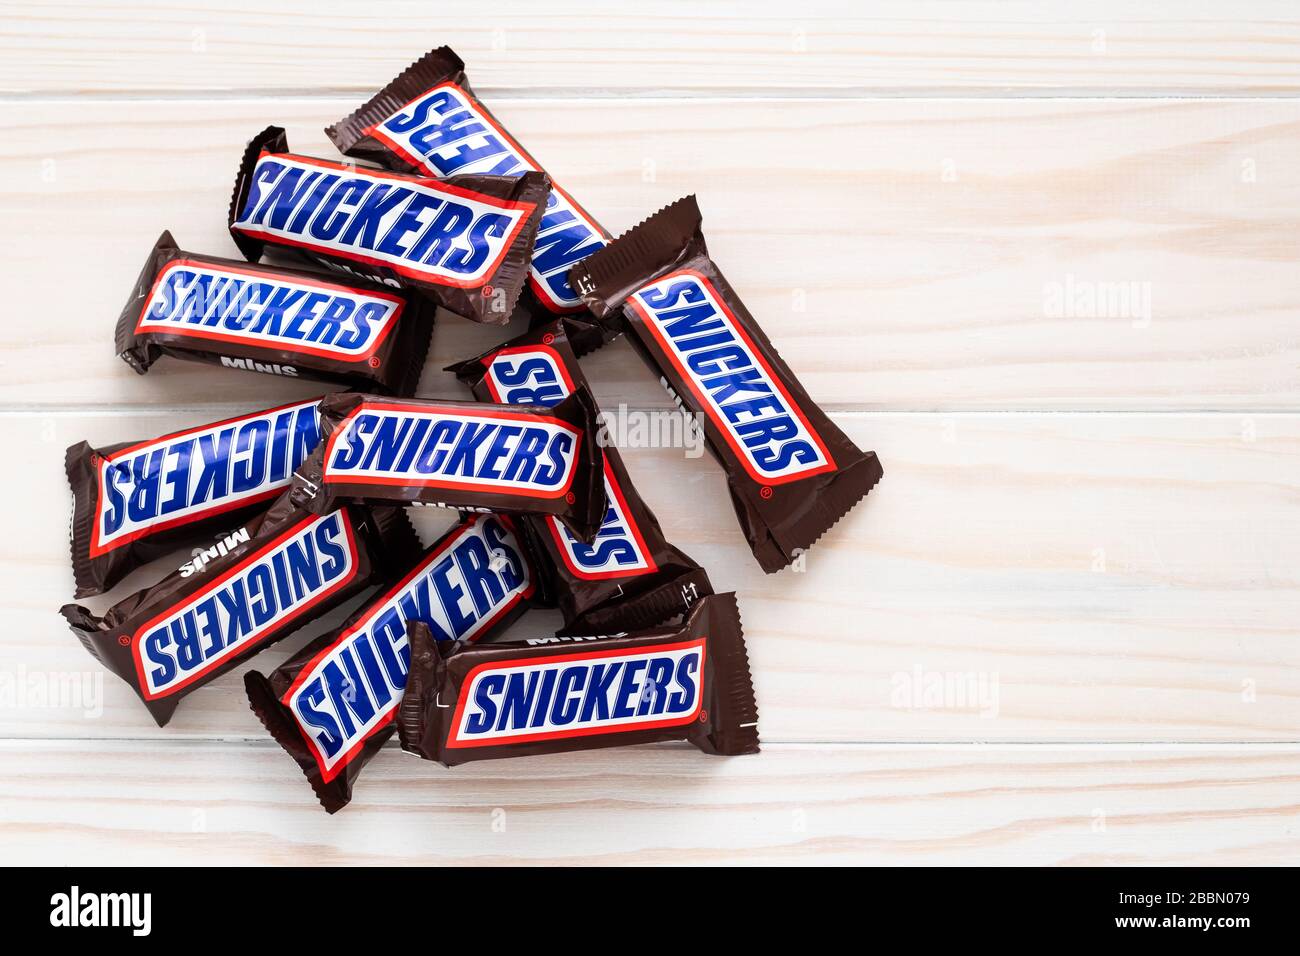 Kharkov, Ukraine, April 01, 2020: Heap of bars of snickers in wrapper on light wooden background. Illustrative editorial Stock Photo